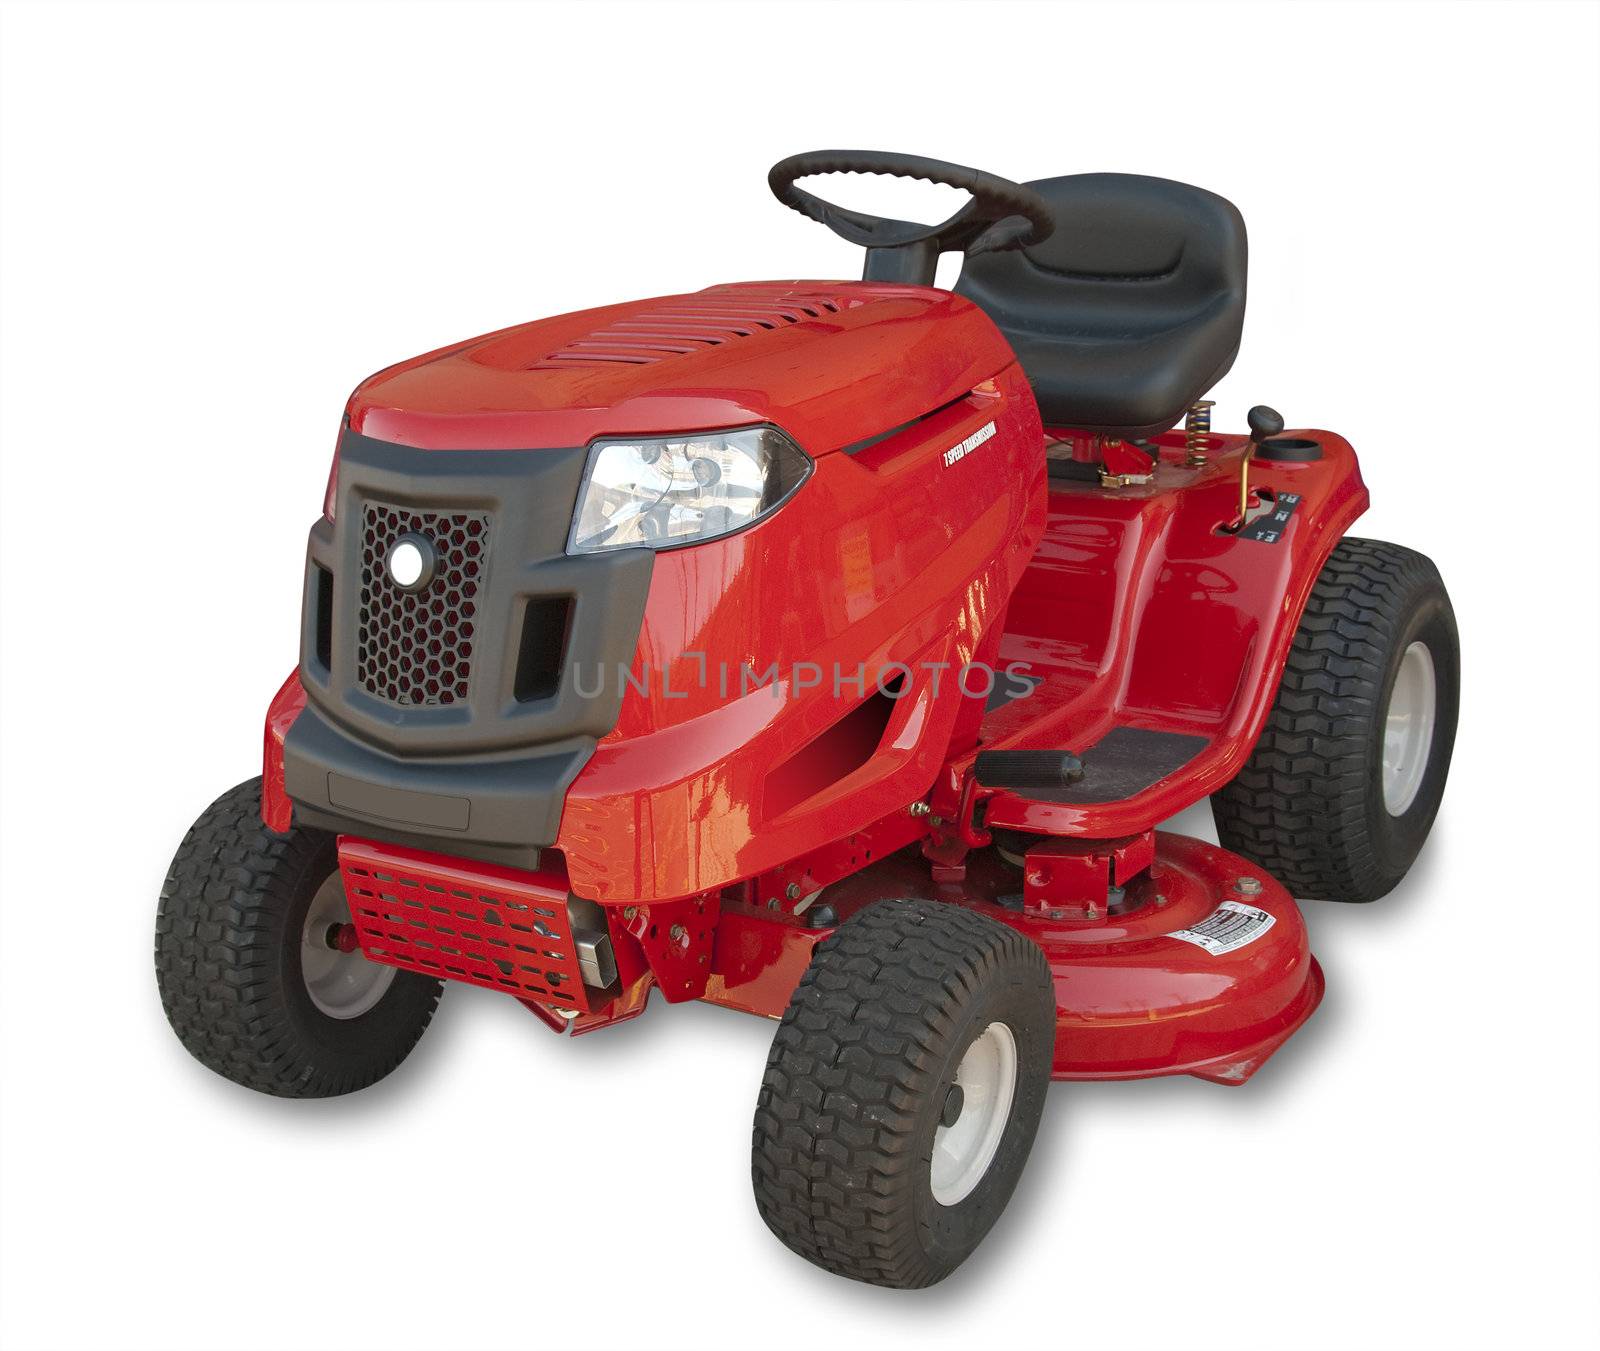 Red sitting lawn tractor on white, isolated with shadow and clipping path